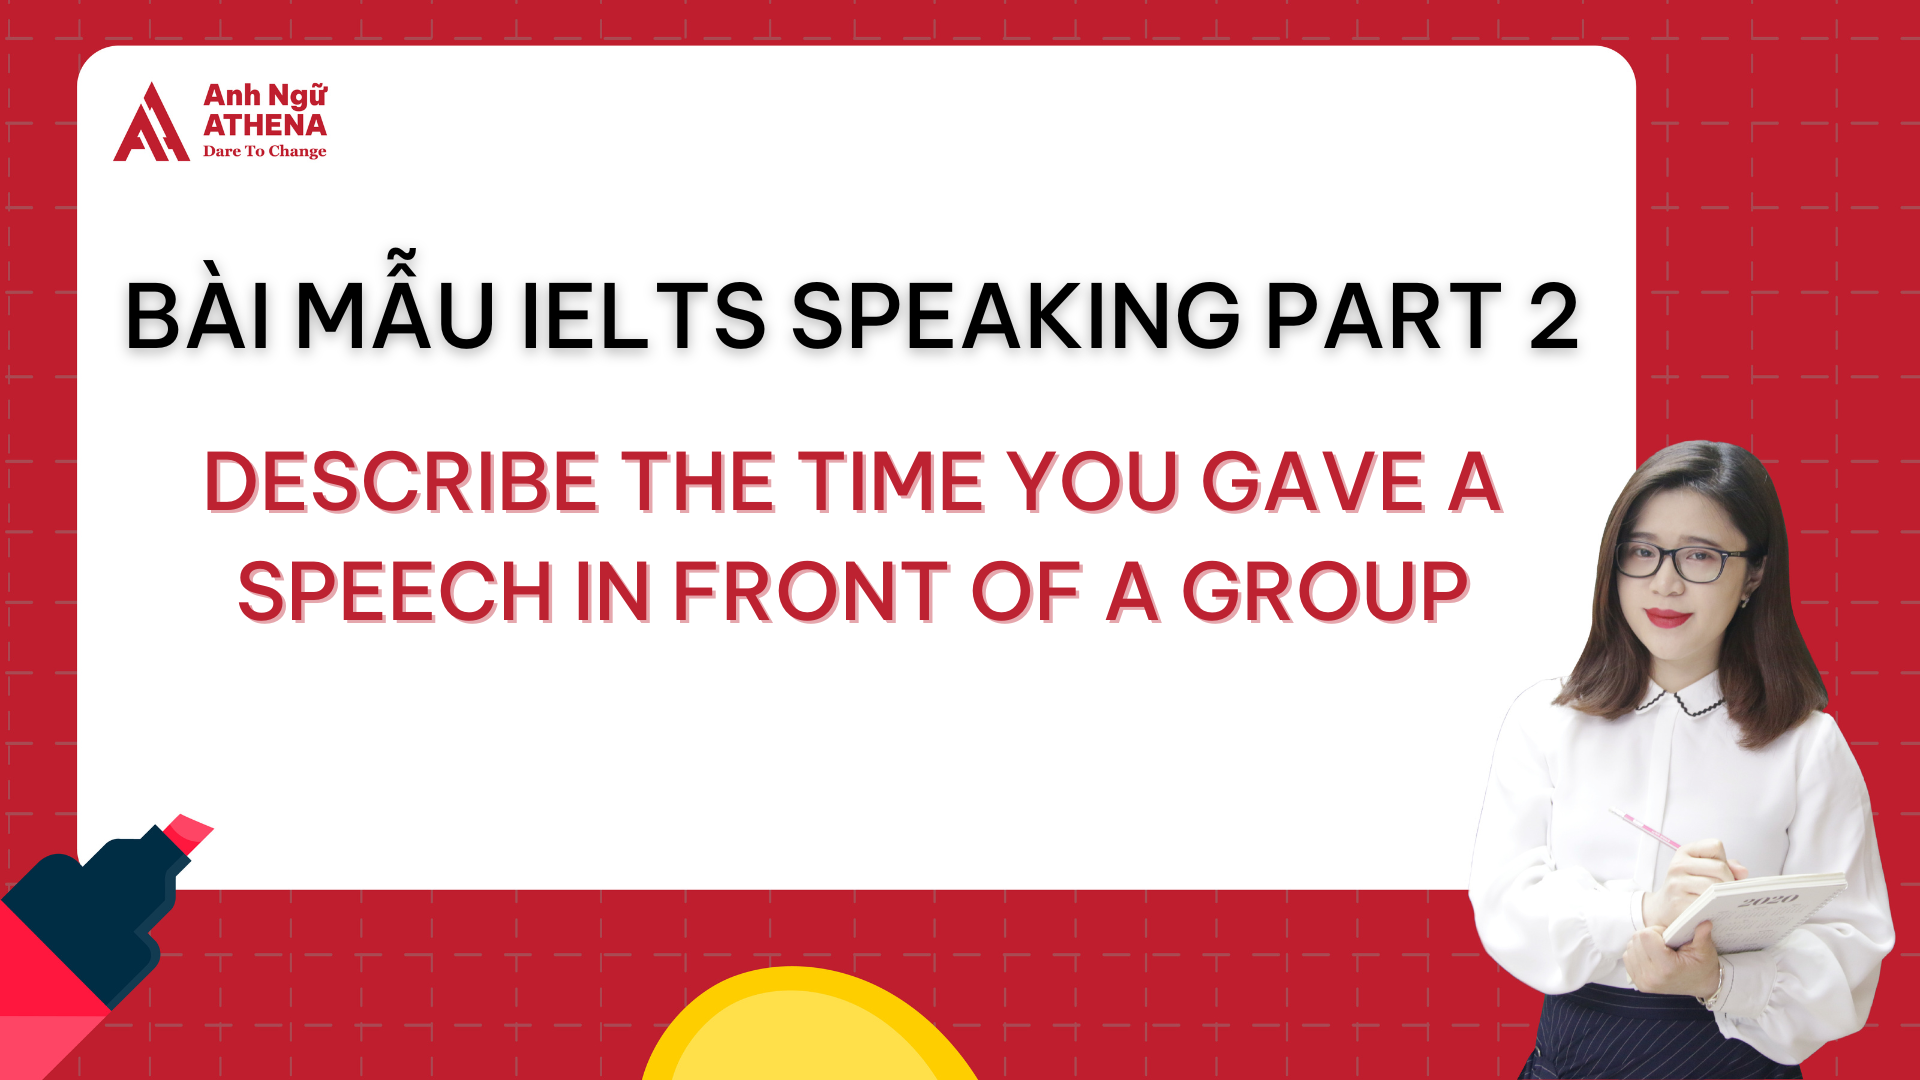 Bài mẫu IELTS Speaking Part 2 - Topic: Describe the time you gave a speech in front of a group